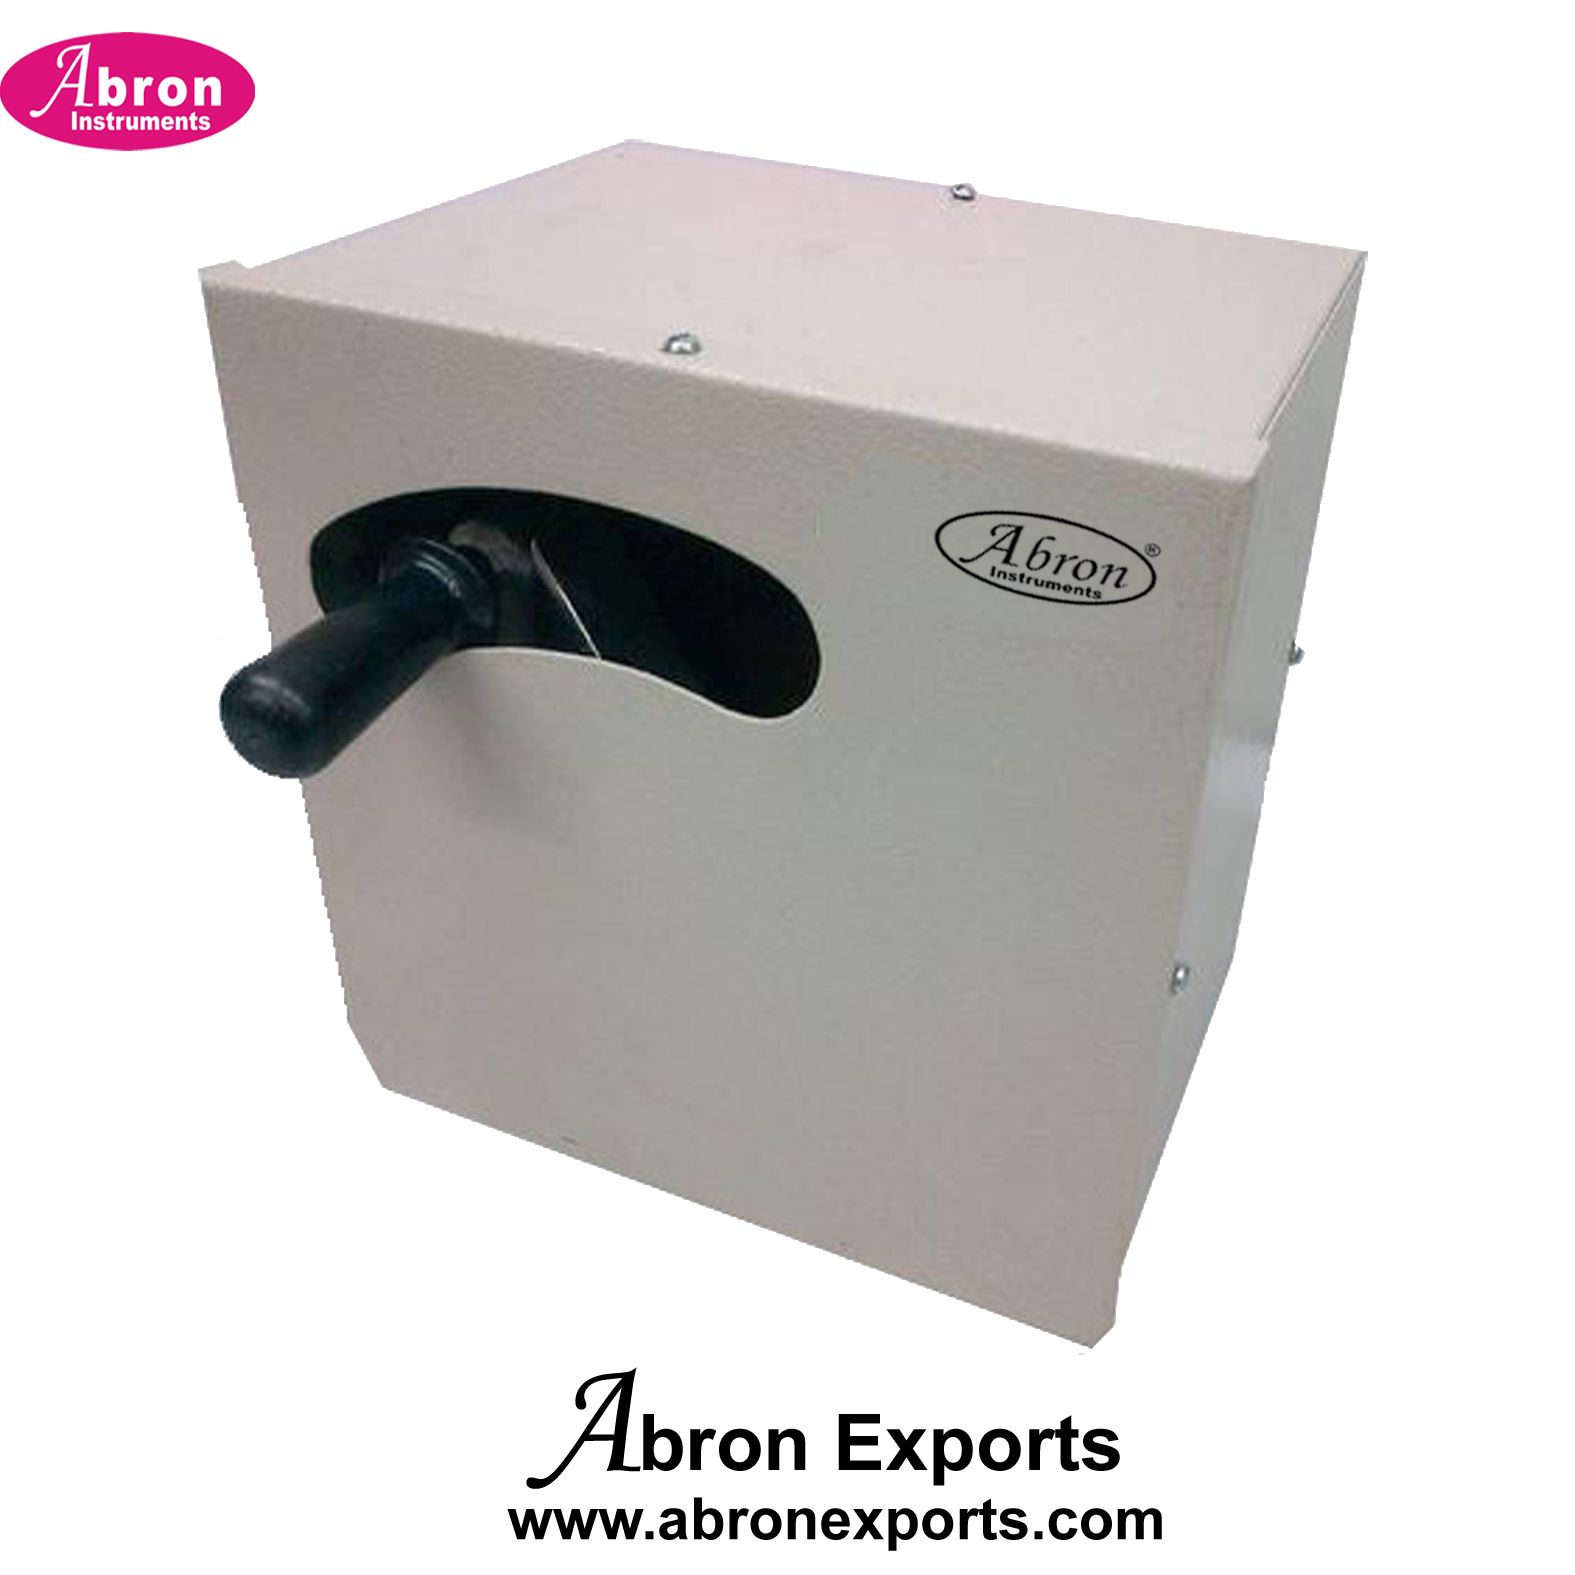 Motor DC Motor Starters 2 or 3 or 4 point explosion proof steet Box Abron AE-8462S234 